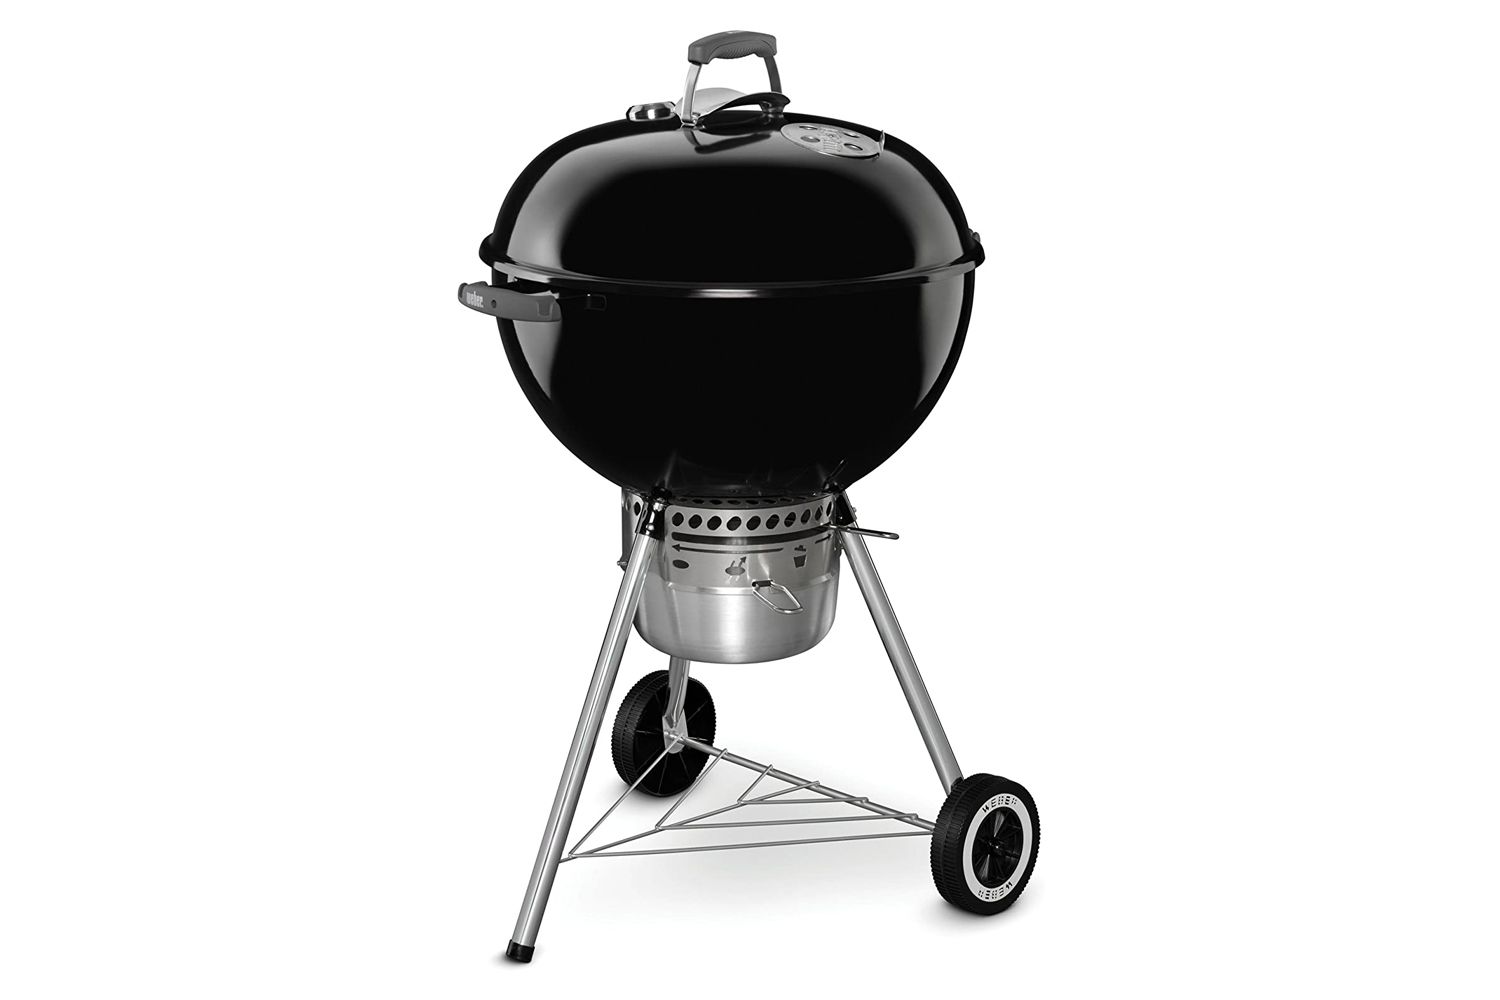 Char Broil vs Weber: Grill Grudge Match - Weighing the Features of Char Broil and Weber Grills